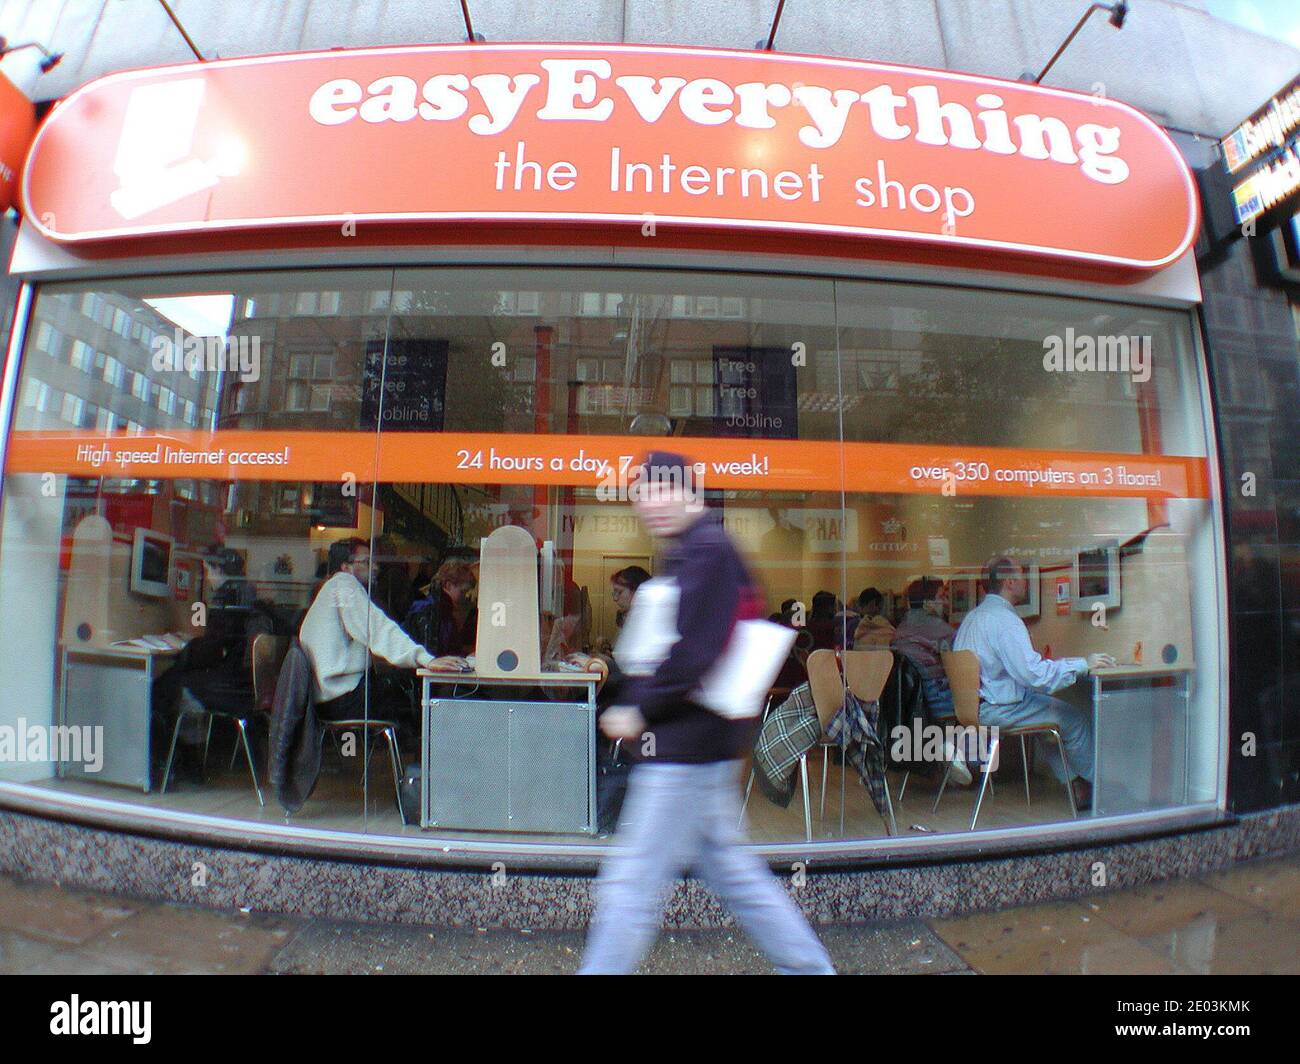 Easyeverything Easy everything th Internet shop  Oxford street London Stock Photo